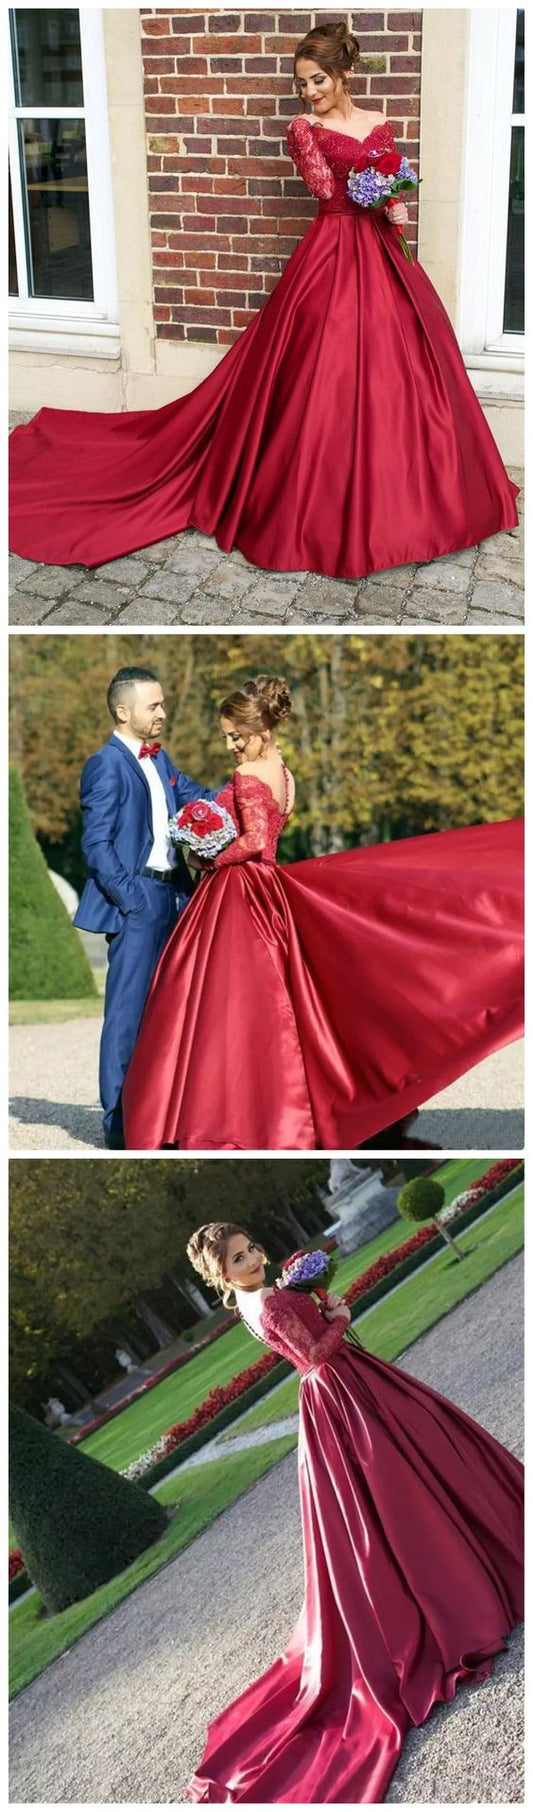 CHIC A-LINE SCOOP LONG SLEEVE LACE PROM DRESS BURGUNDY SATIN FORMAL DRESS EVENING GOWNS   cg14865